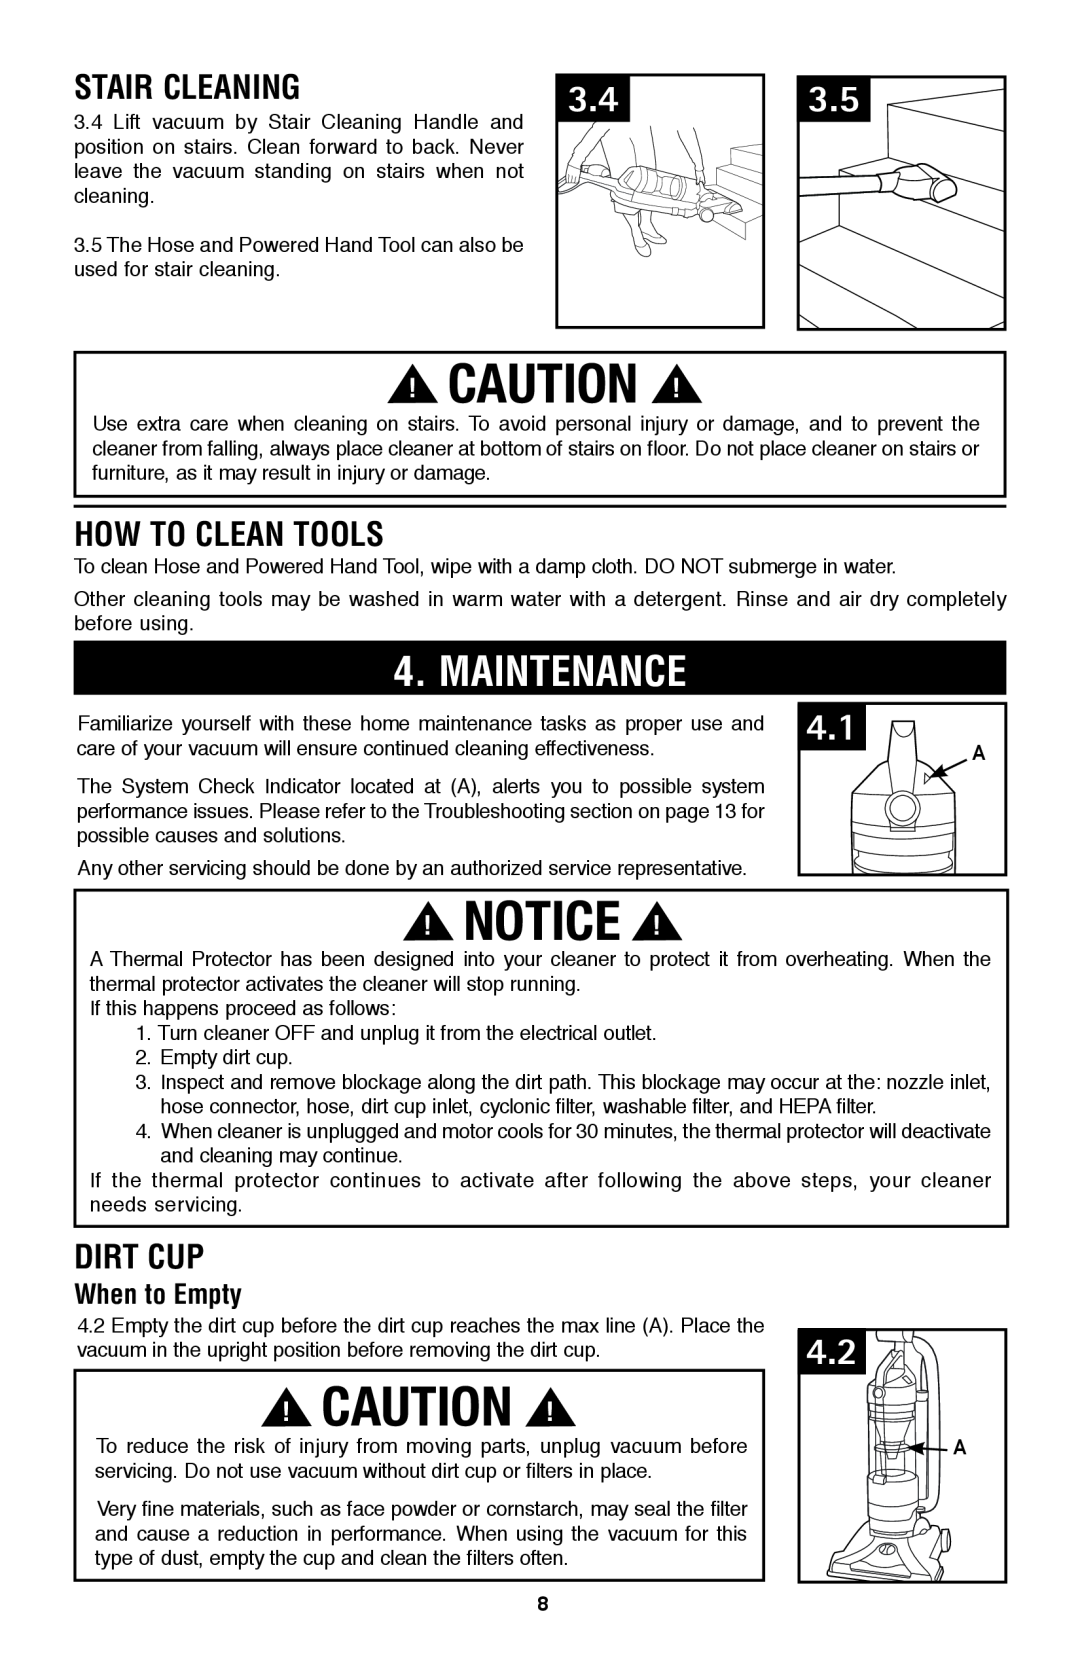 Hoover UH70120 owner manual Maintenance, Stair Cleaning, How to Clean Tools, Dirt Cup, When to Empty 